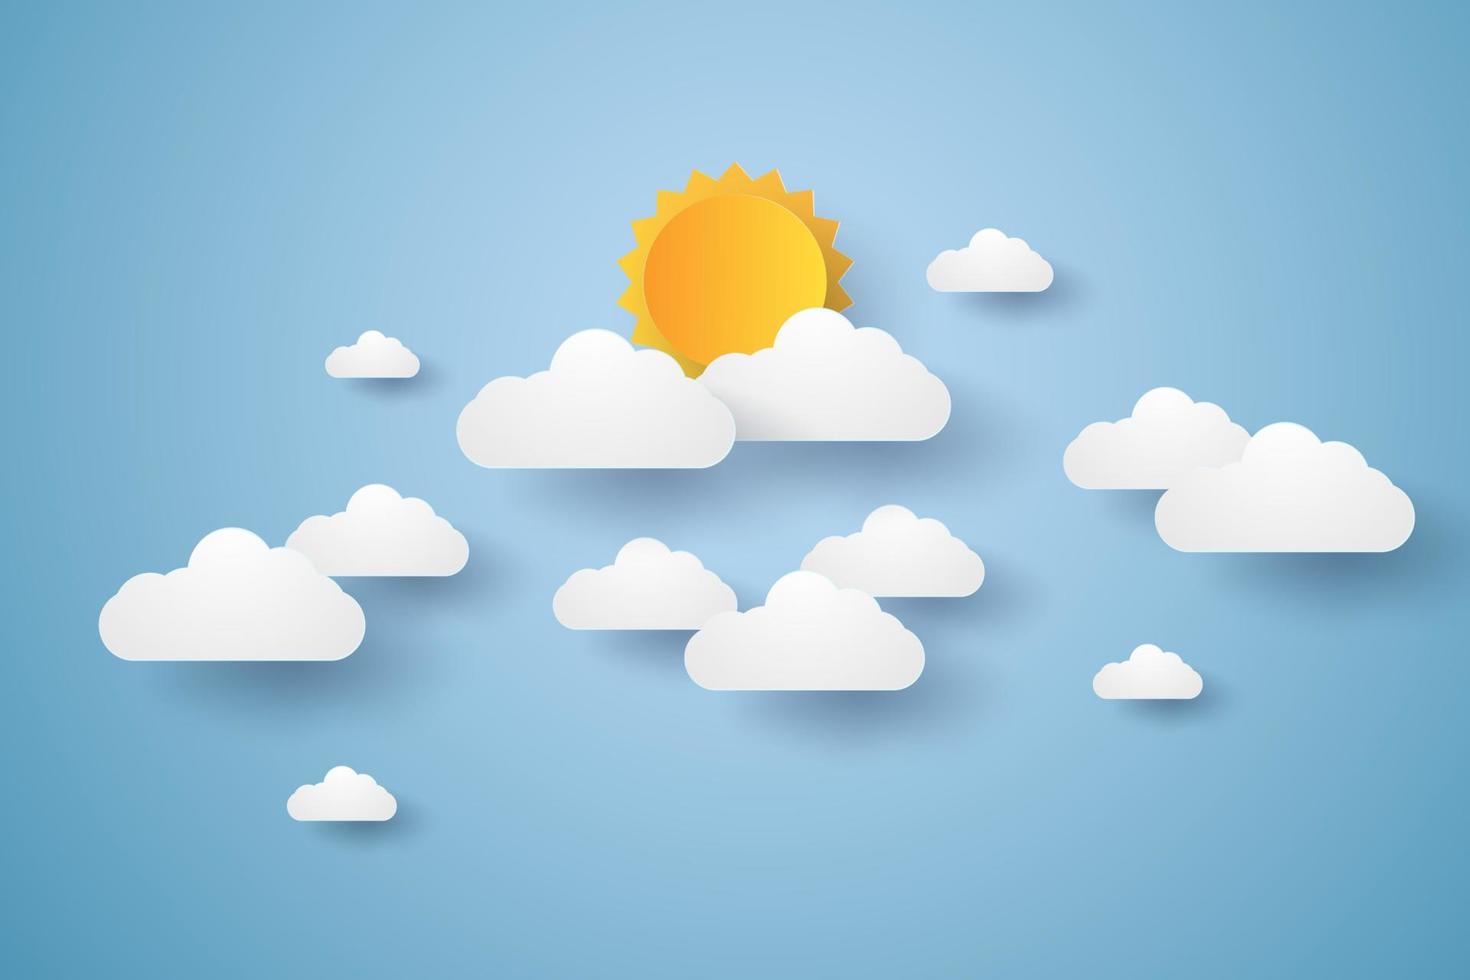 Cloudscape, blue sky with clouds and sun, paper art style vector